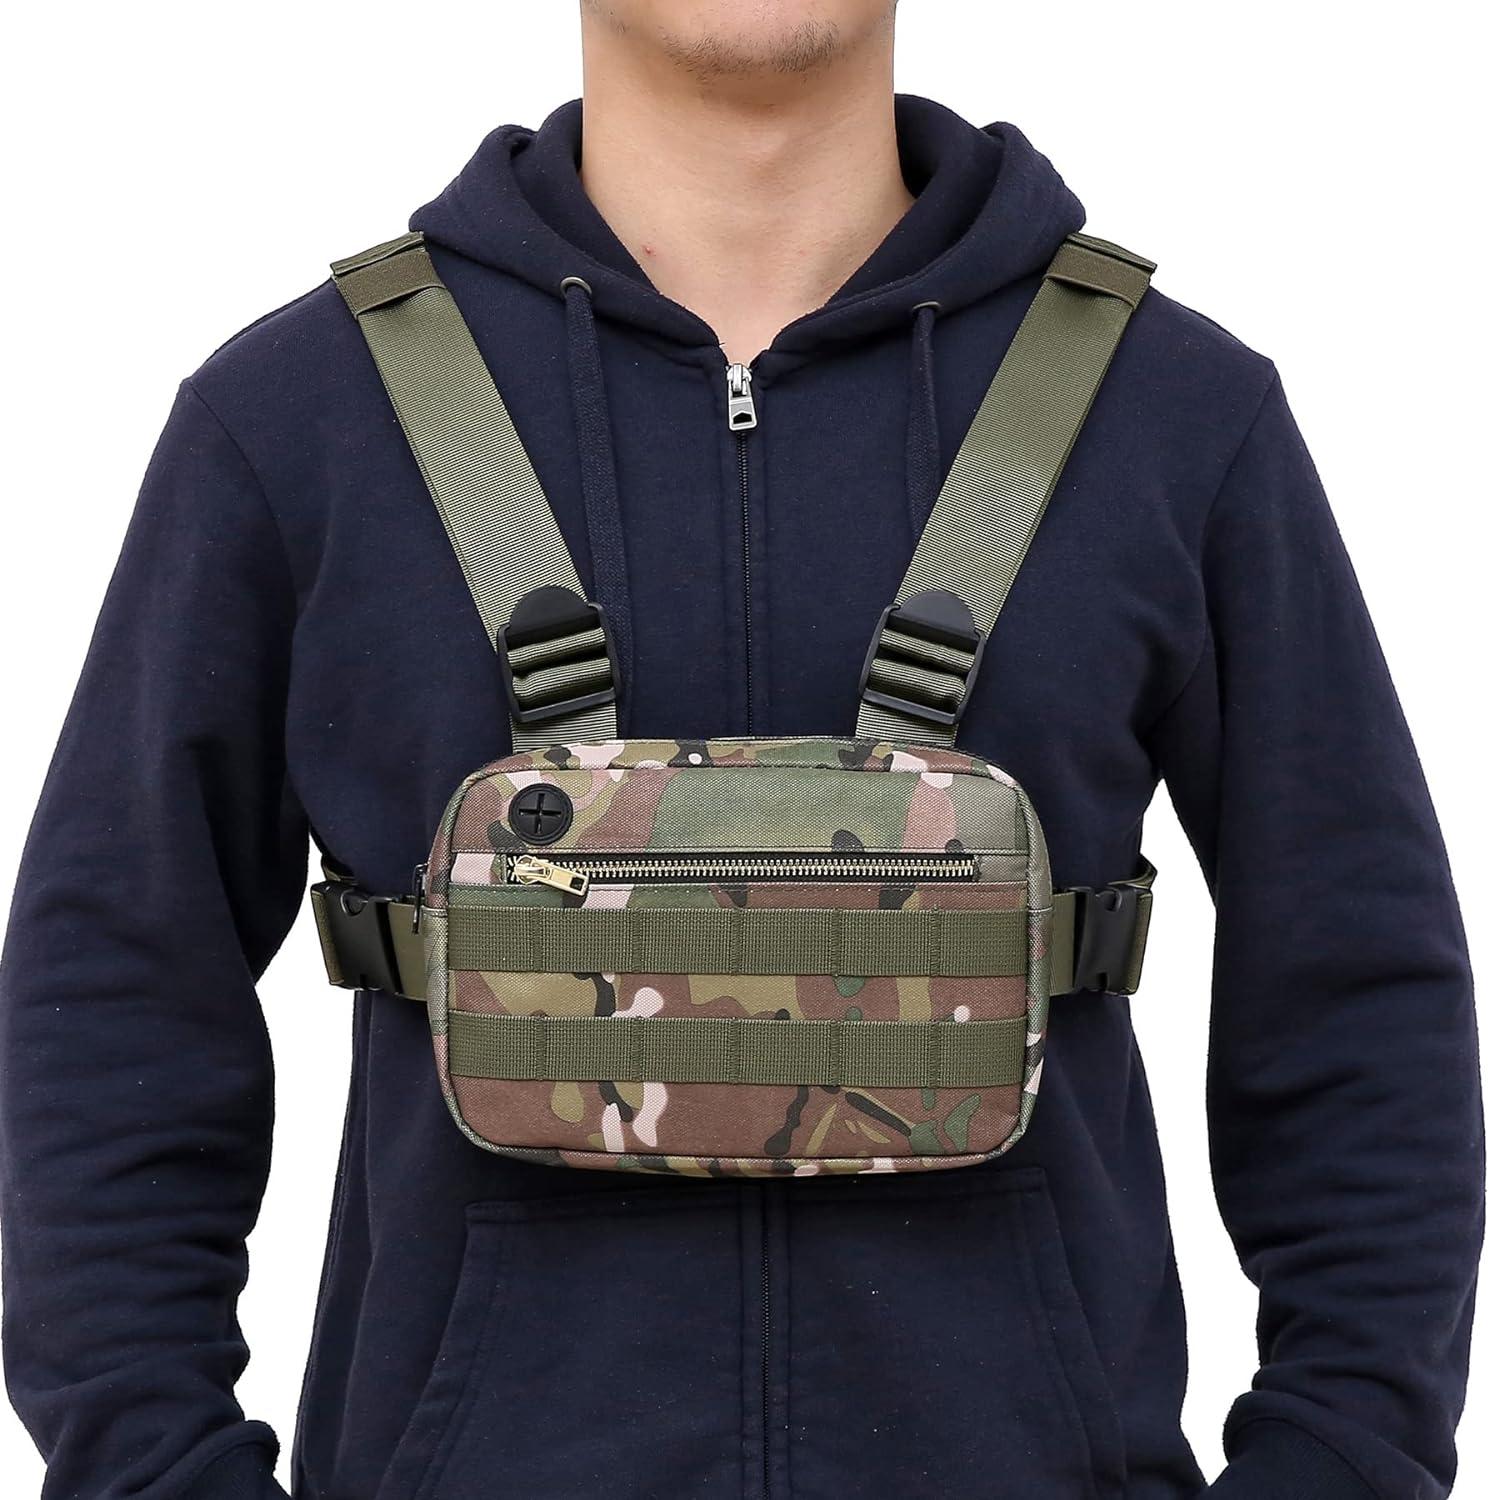 Outdoor Water Resistant Chest Bag For Men, Tactical EDC Chest Pack With  Built-In Phone Holder